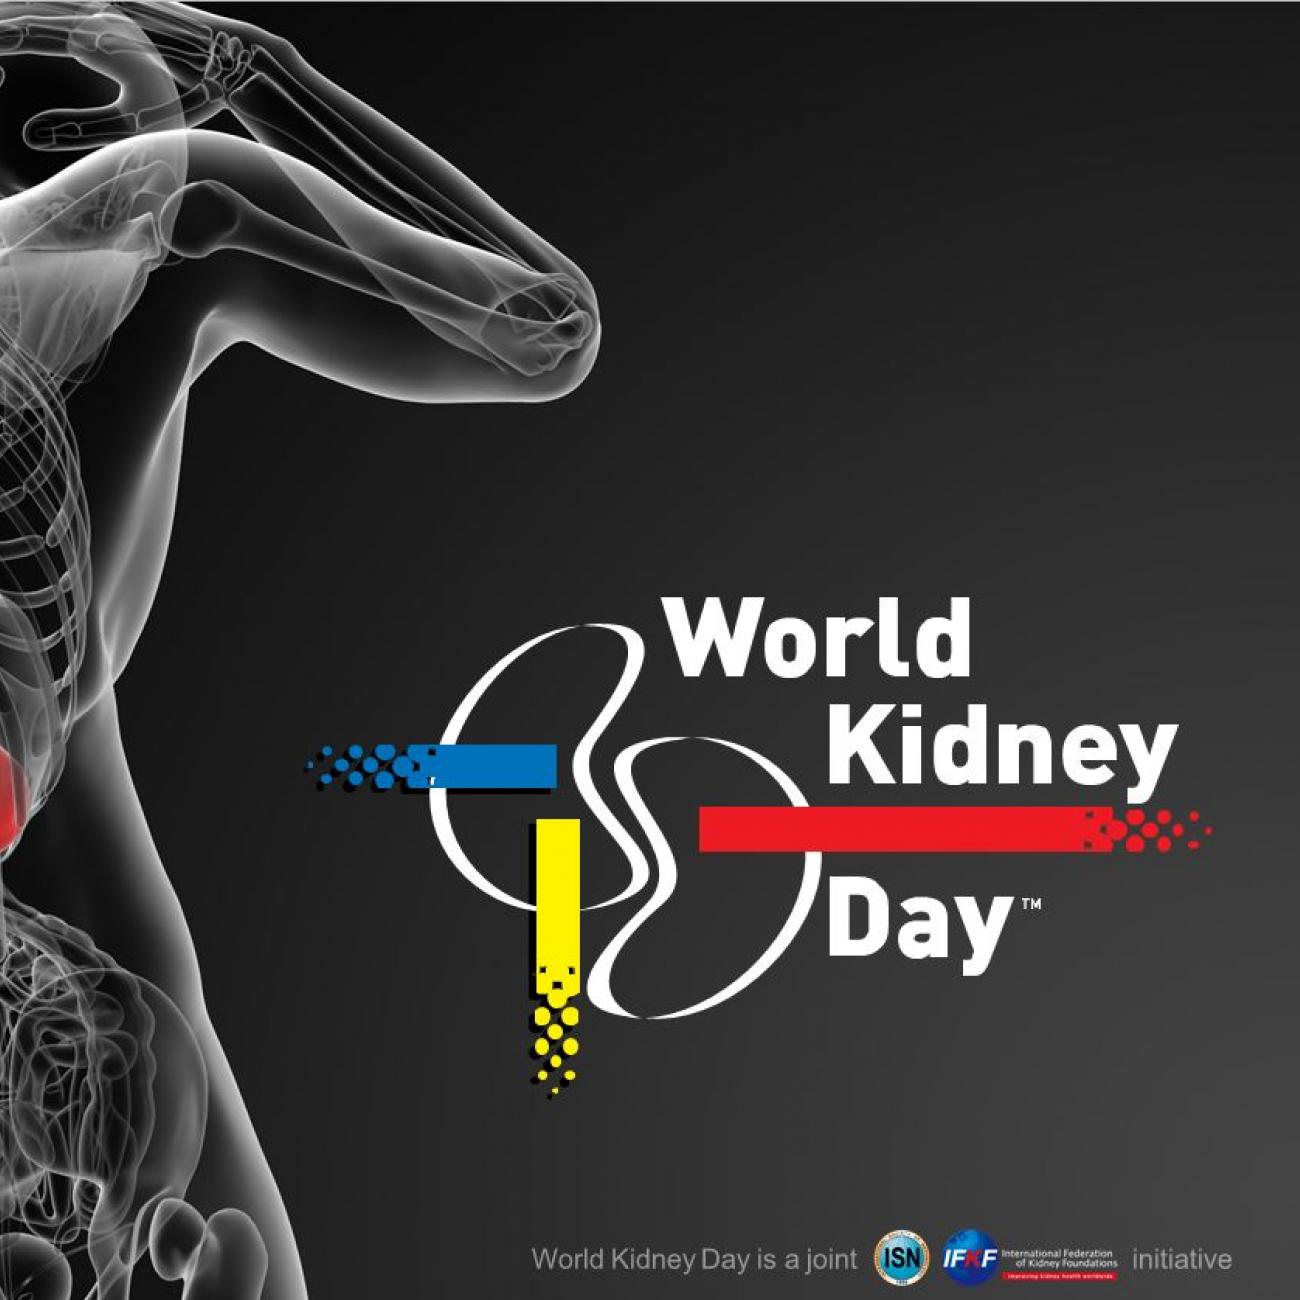 World Kidney Day poster with picture showing where kidneys are located in the body